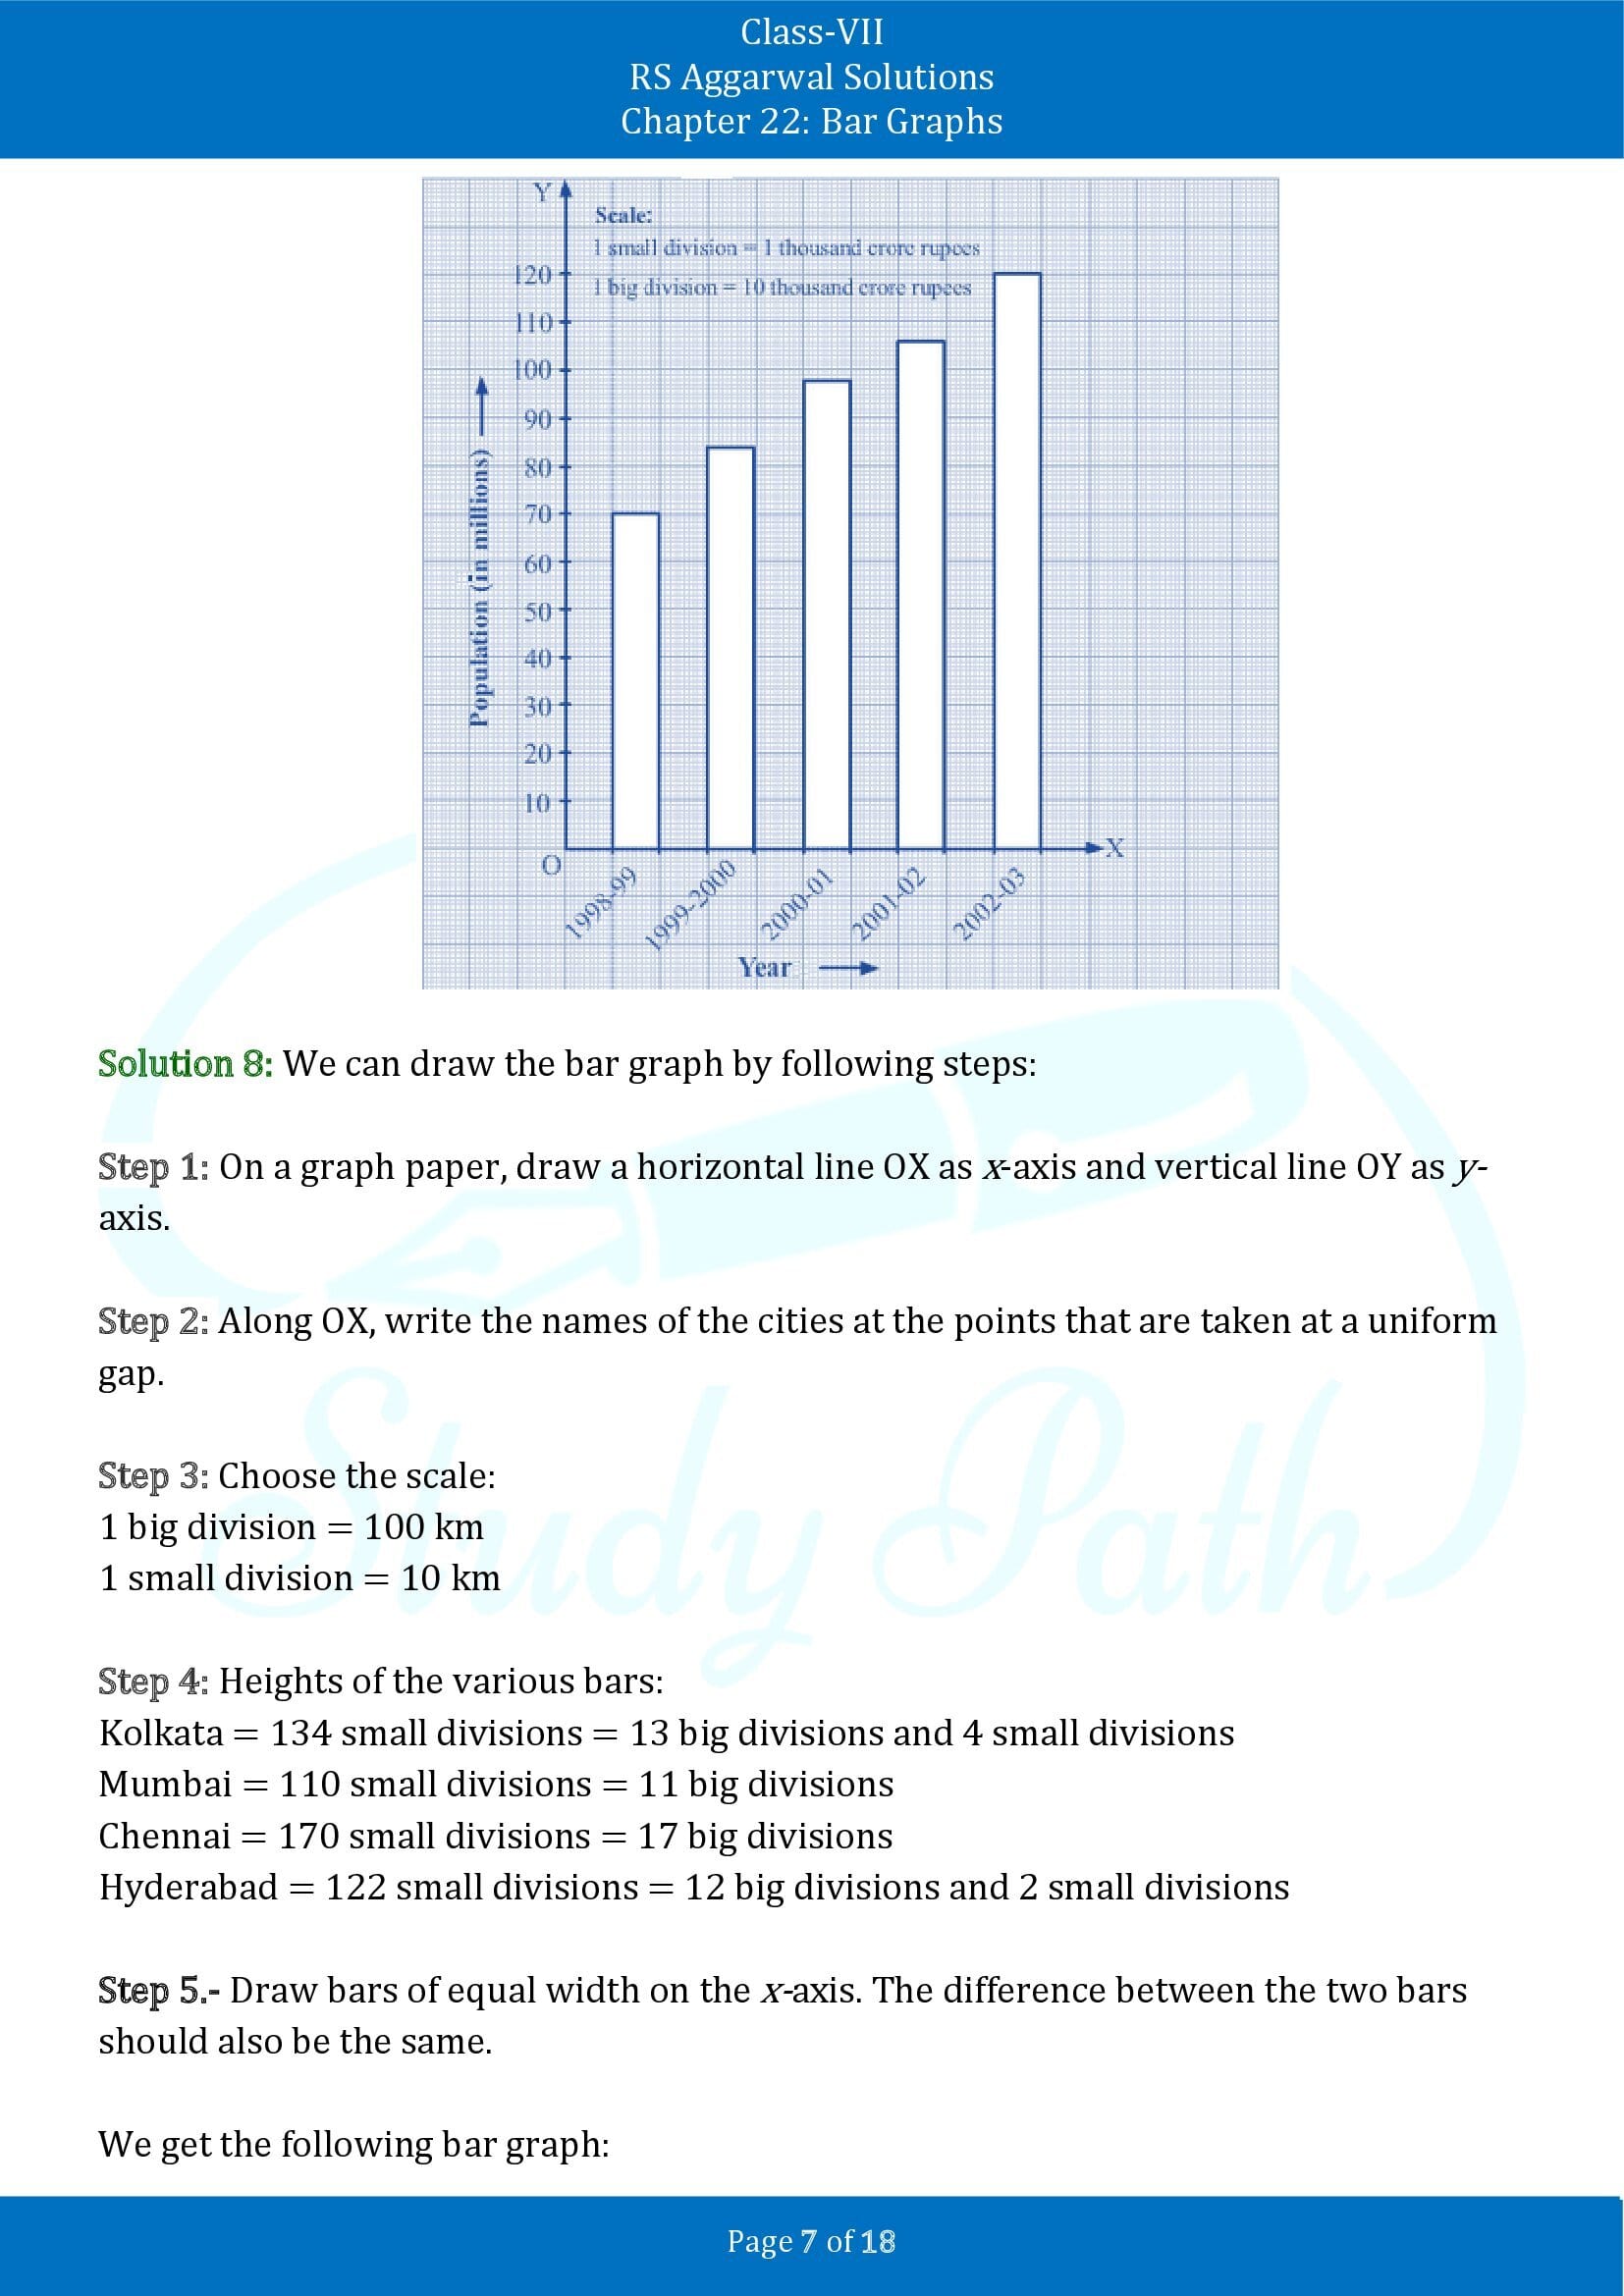 RS Aggarwal Solutions Class 7 Chapter 22 Bar Graphs 00007